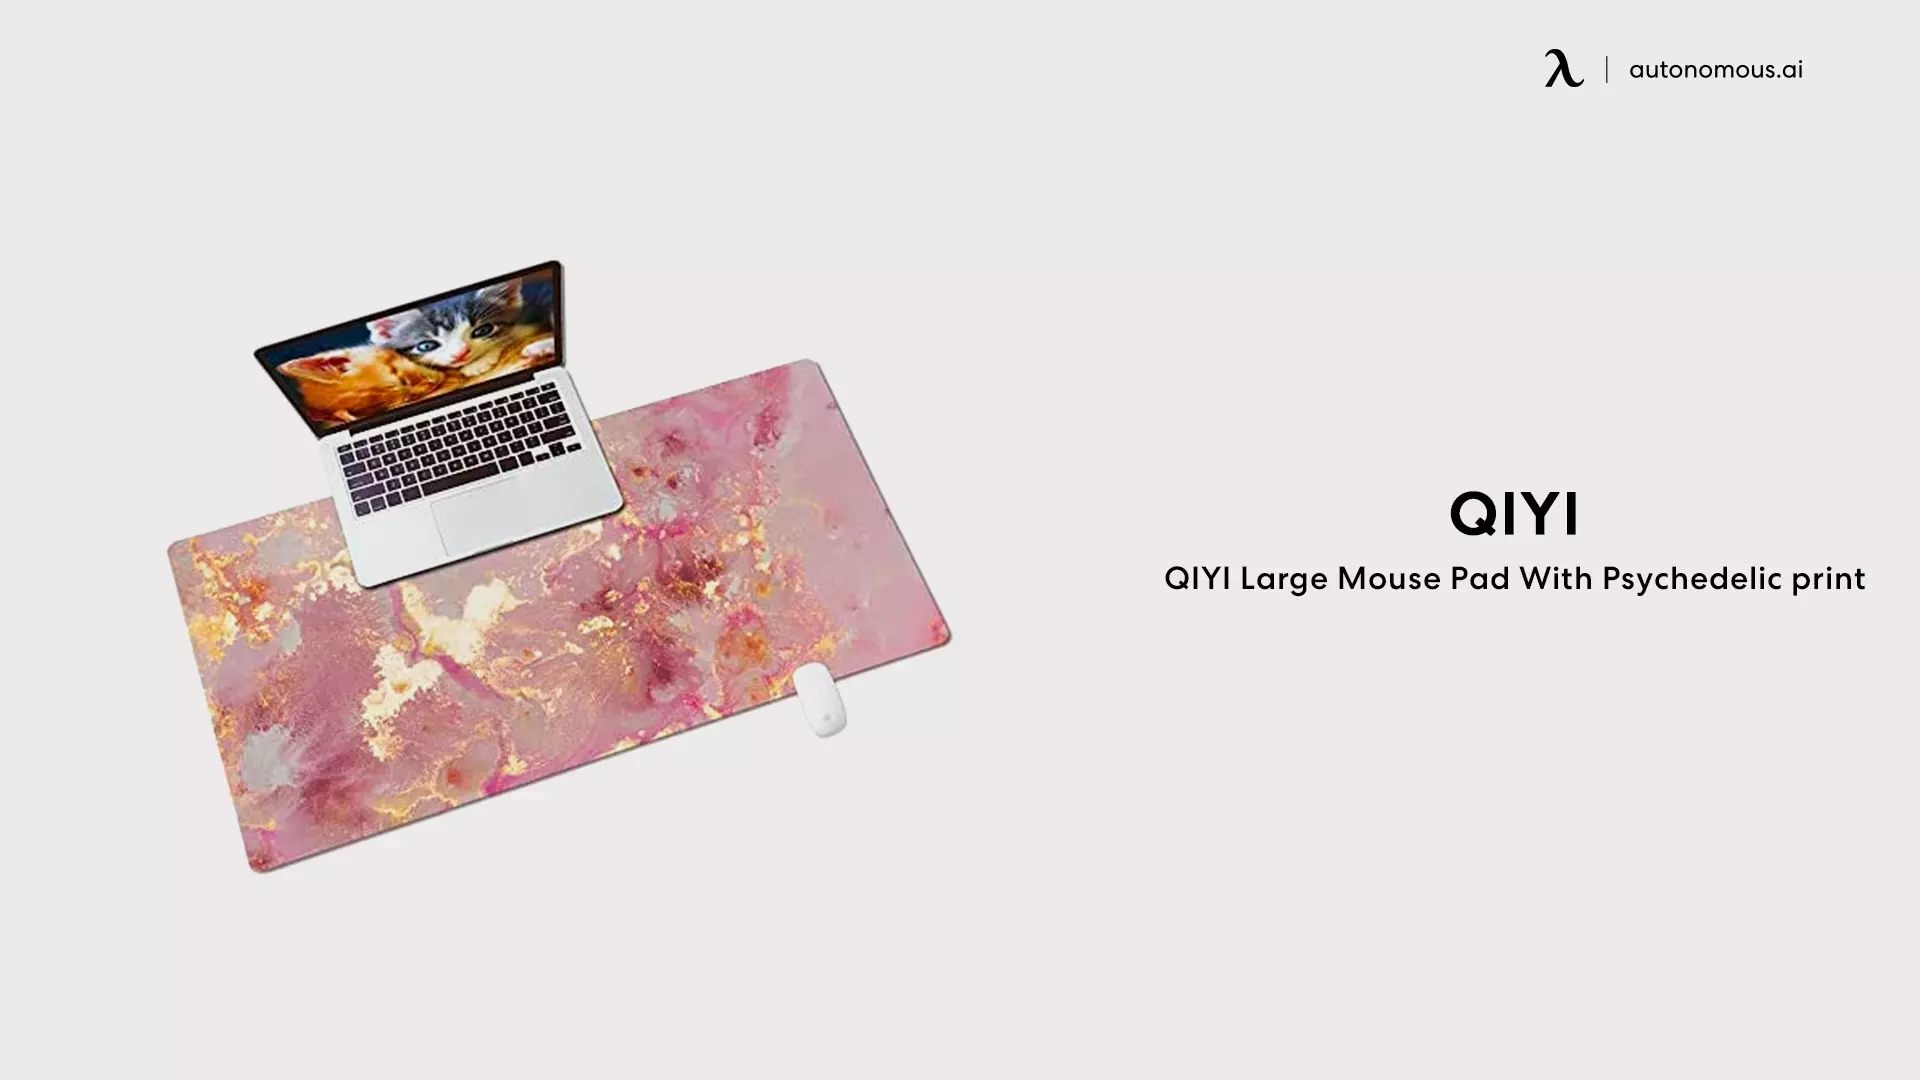 QIYI Large Mouse Pad With Psychedelic print